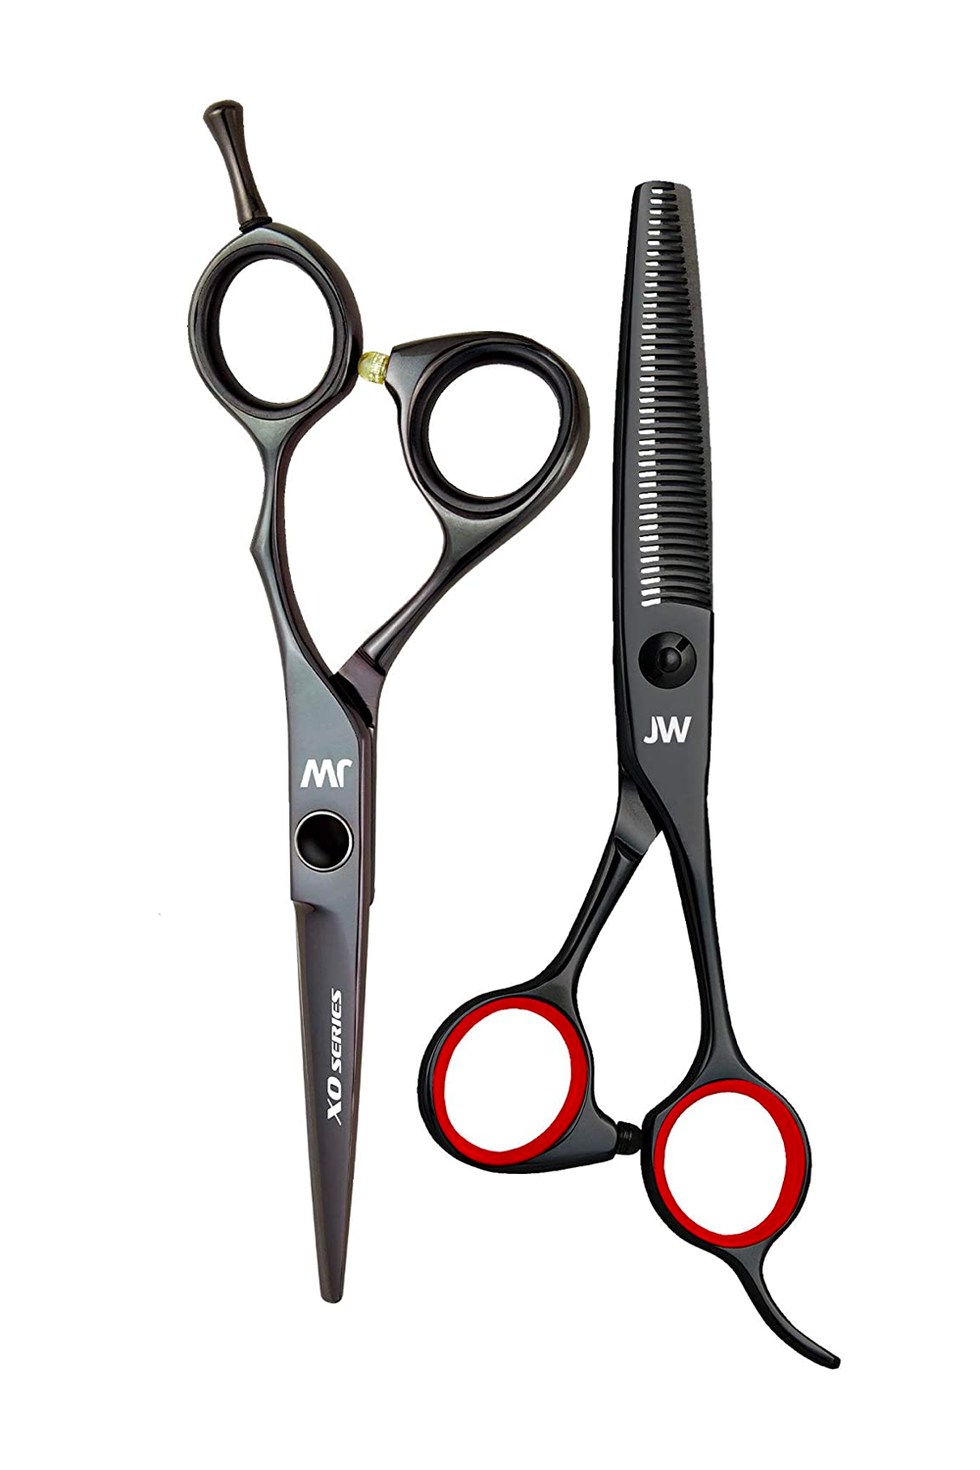 Fagaci Professional Hair Scissors 5 inch with Extremely Sharp Blades 440C Steel Hair Cutting Scissors Durable Smooth Motion & Fine Cut Barber Scis